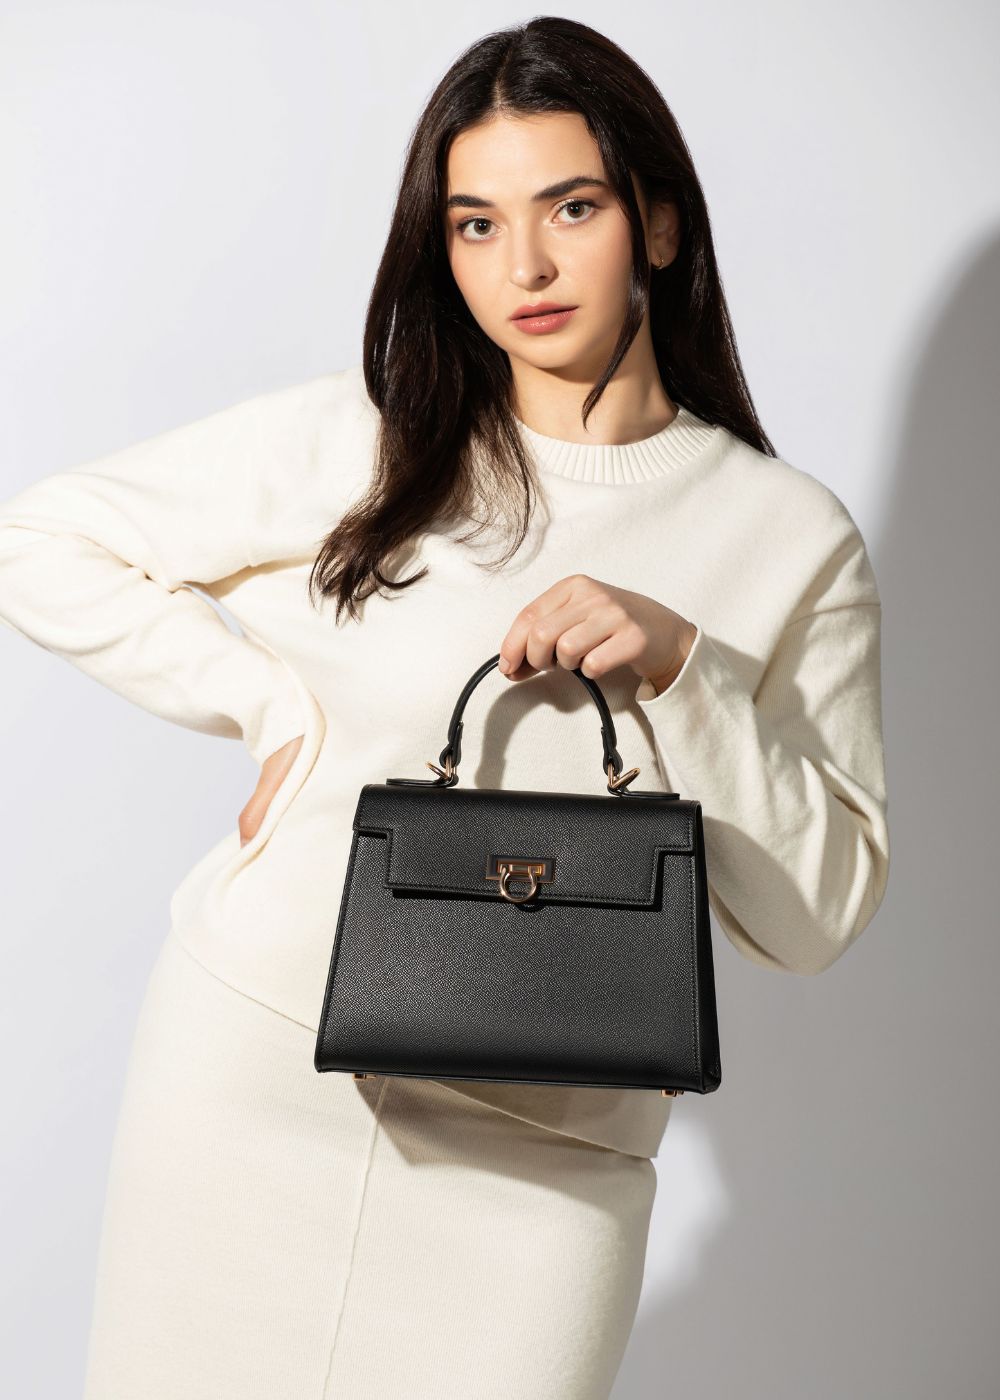 A woman in a white dress elegantly holds a black handbag from the Levantine top handle bags, Layla collection